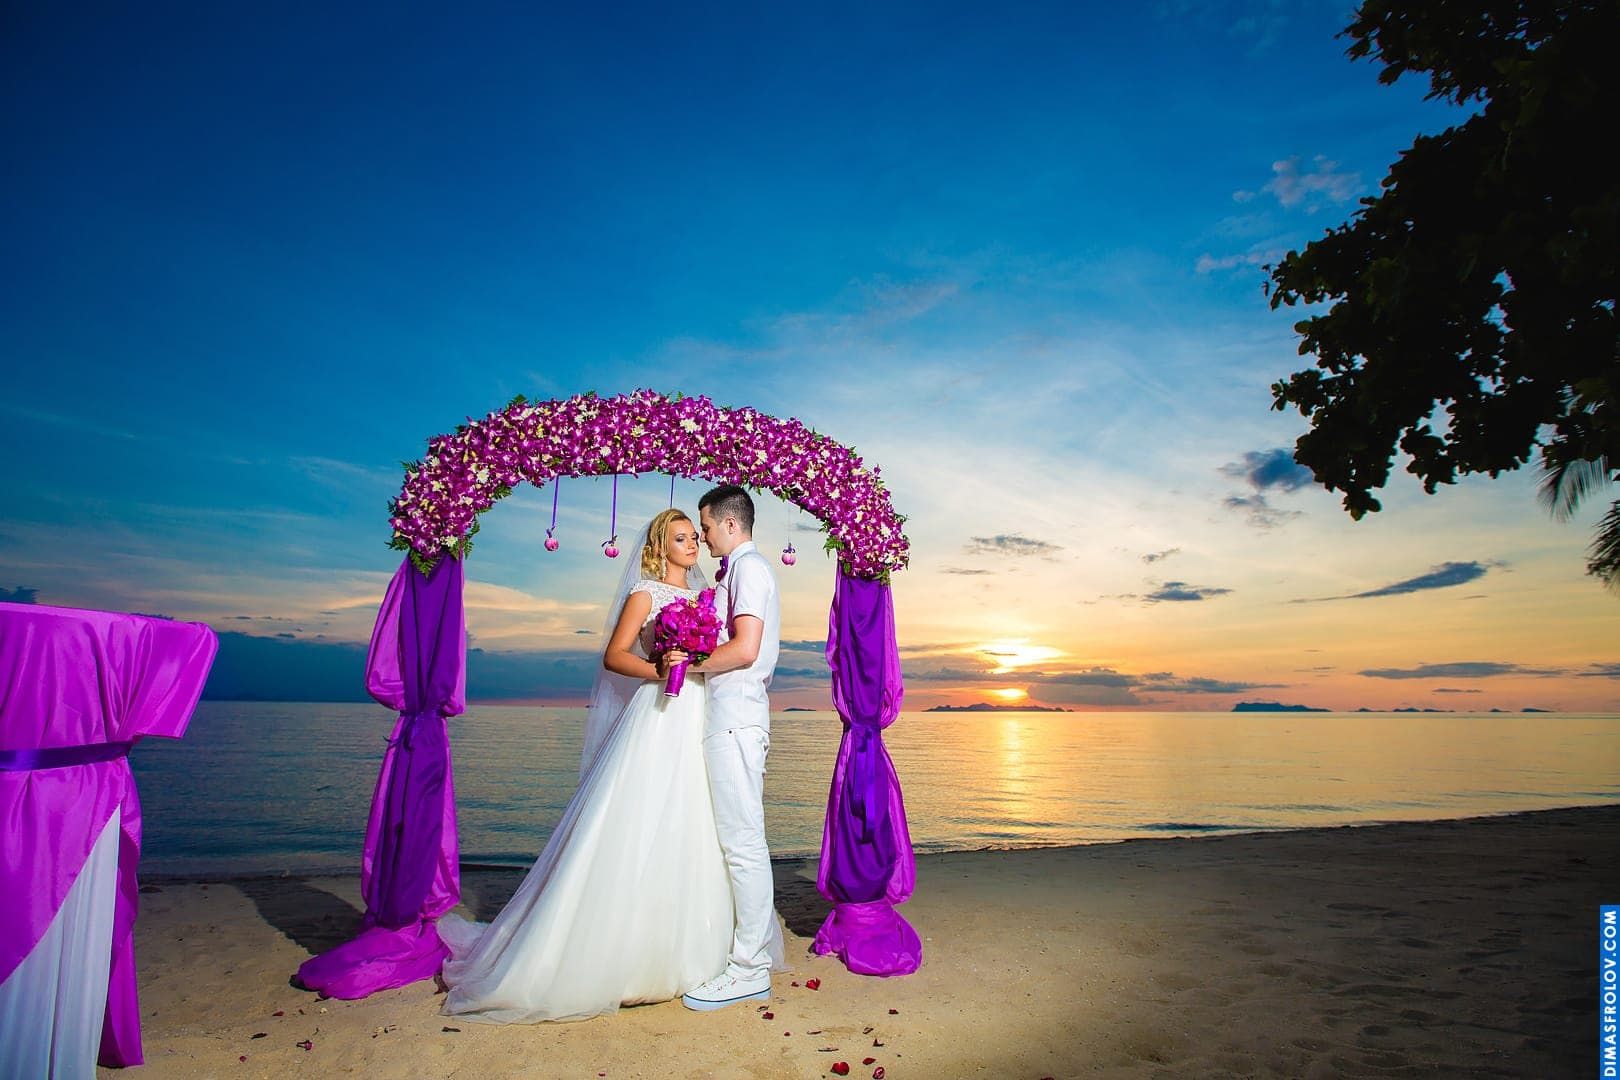 How is the wedding photo shoot in Thailand?. photographer Dimas Frolov. photo550